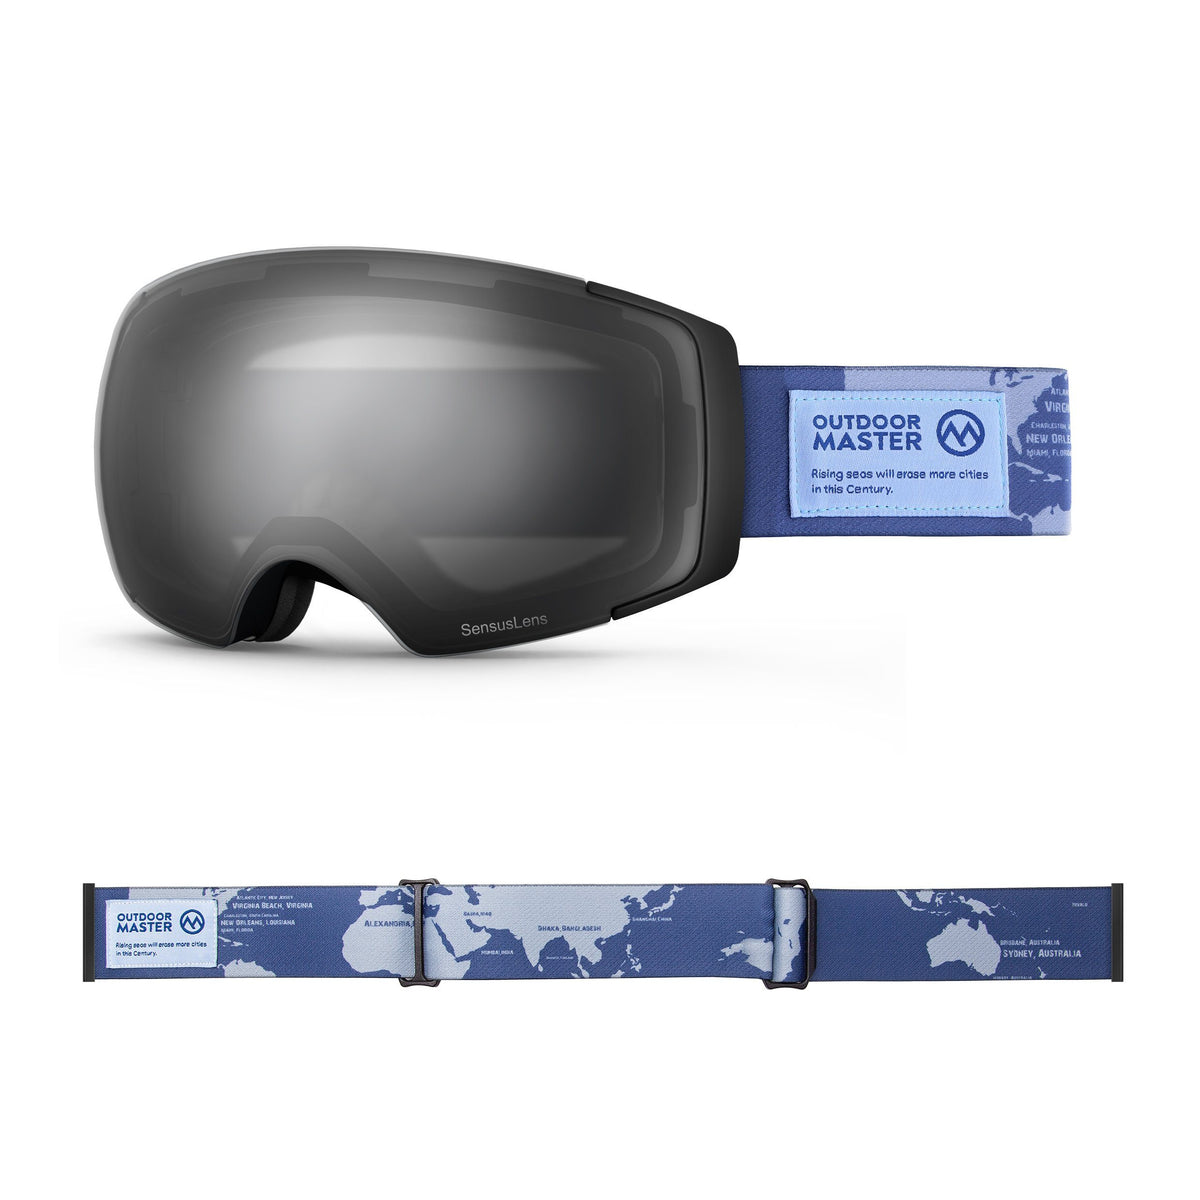 Eco-friendly Ski Goggles Pro Series - The Disappearing Places/Classic BambooStraps Limited Edition OutdoorMaster SensusLens VLT 16-80% Photochromatic clear to Grey The Disappearing Places